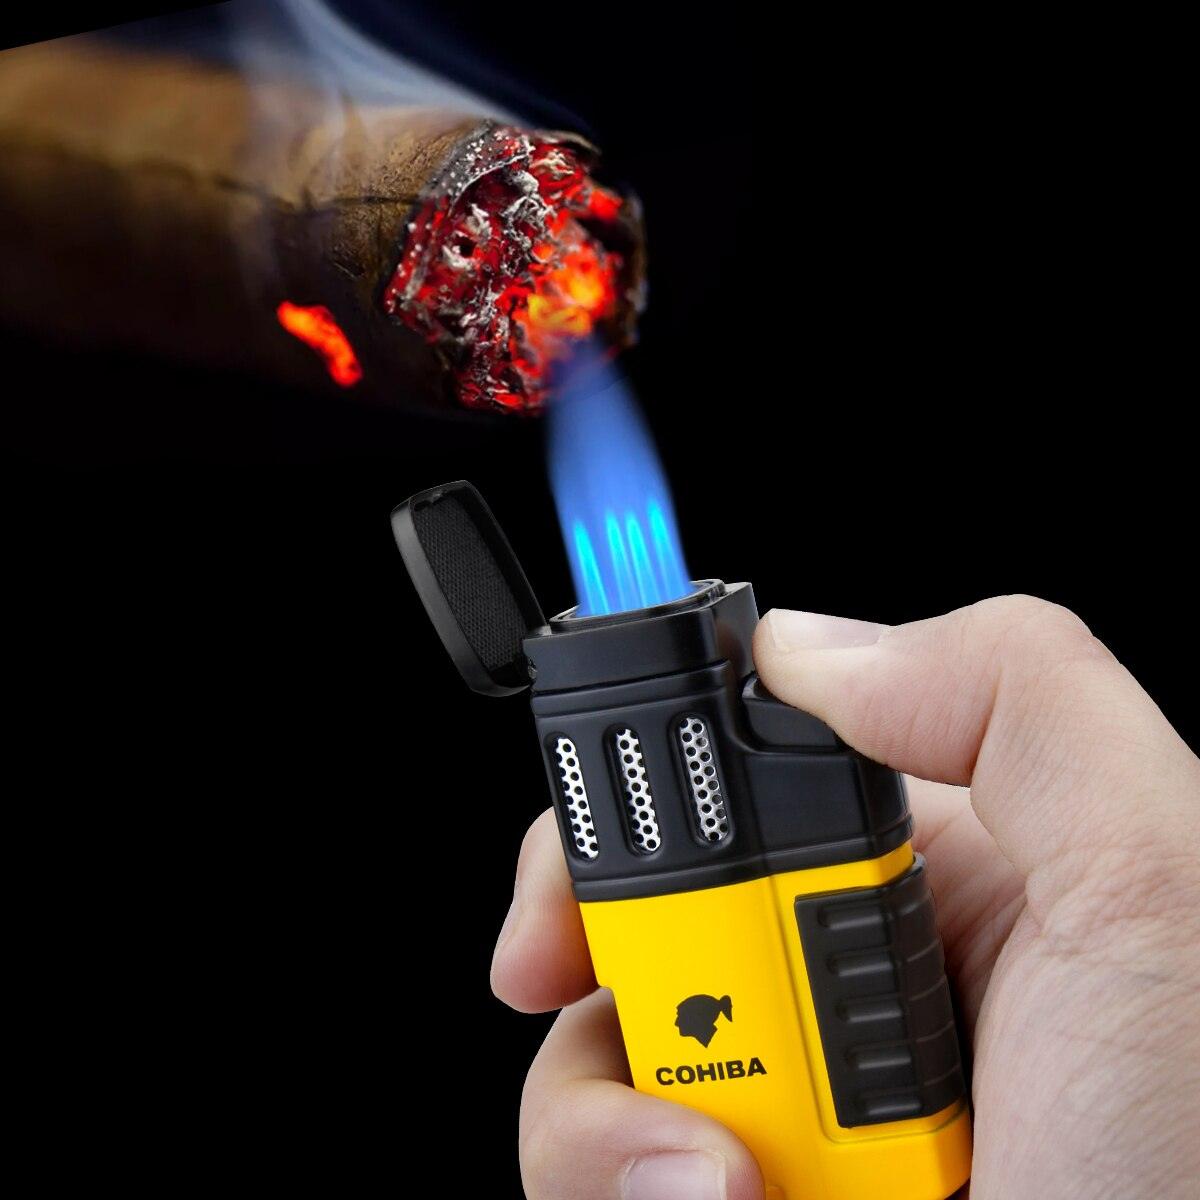 4 Torch Jet Flame Cigar Lighter: Refillable with Punch Tool - Cigar Mafia